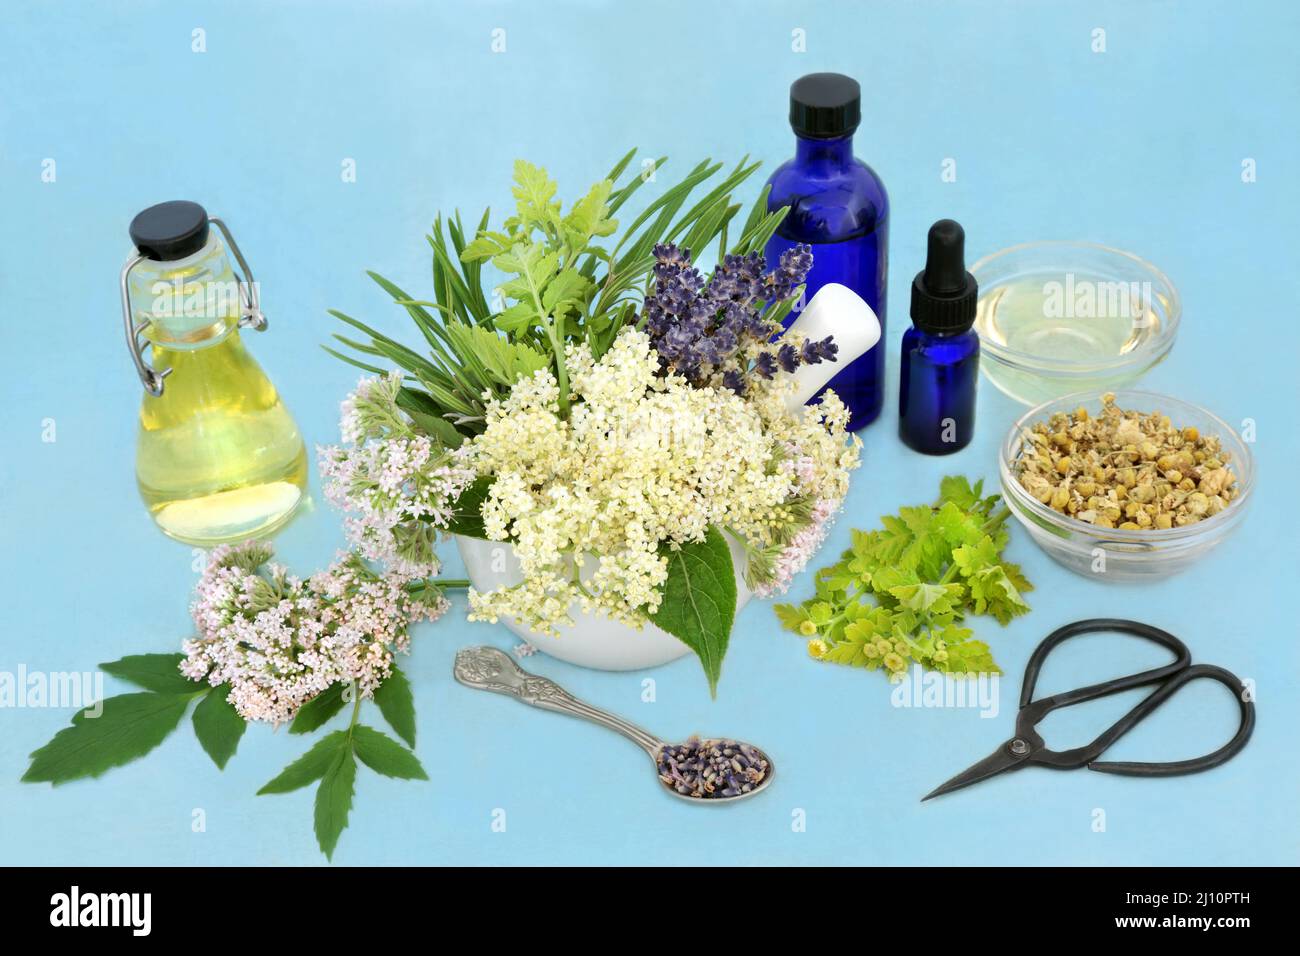 Naturopathic herbal plant medicine with valerian, chamomile, lavender, elderflower herbs with preparation equipment. A tranquilizer, reduces anxiety. Stock Photo